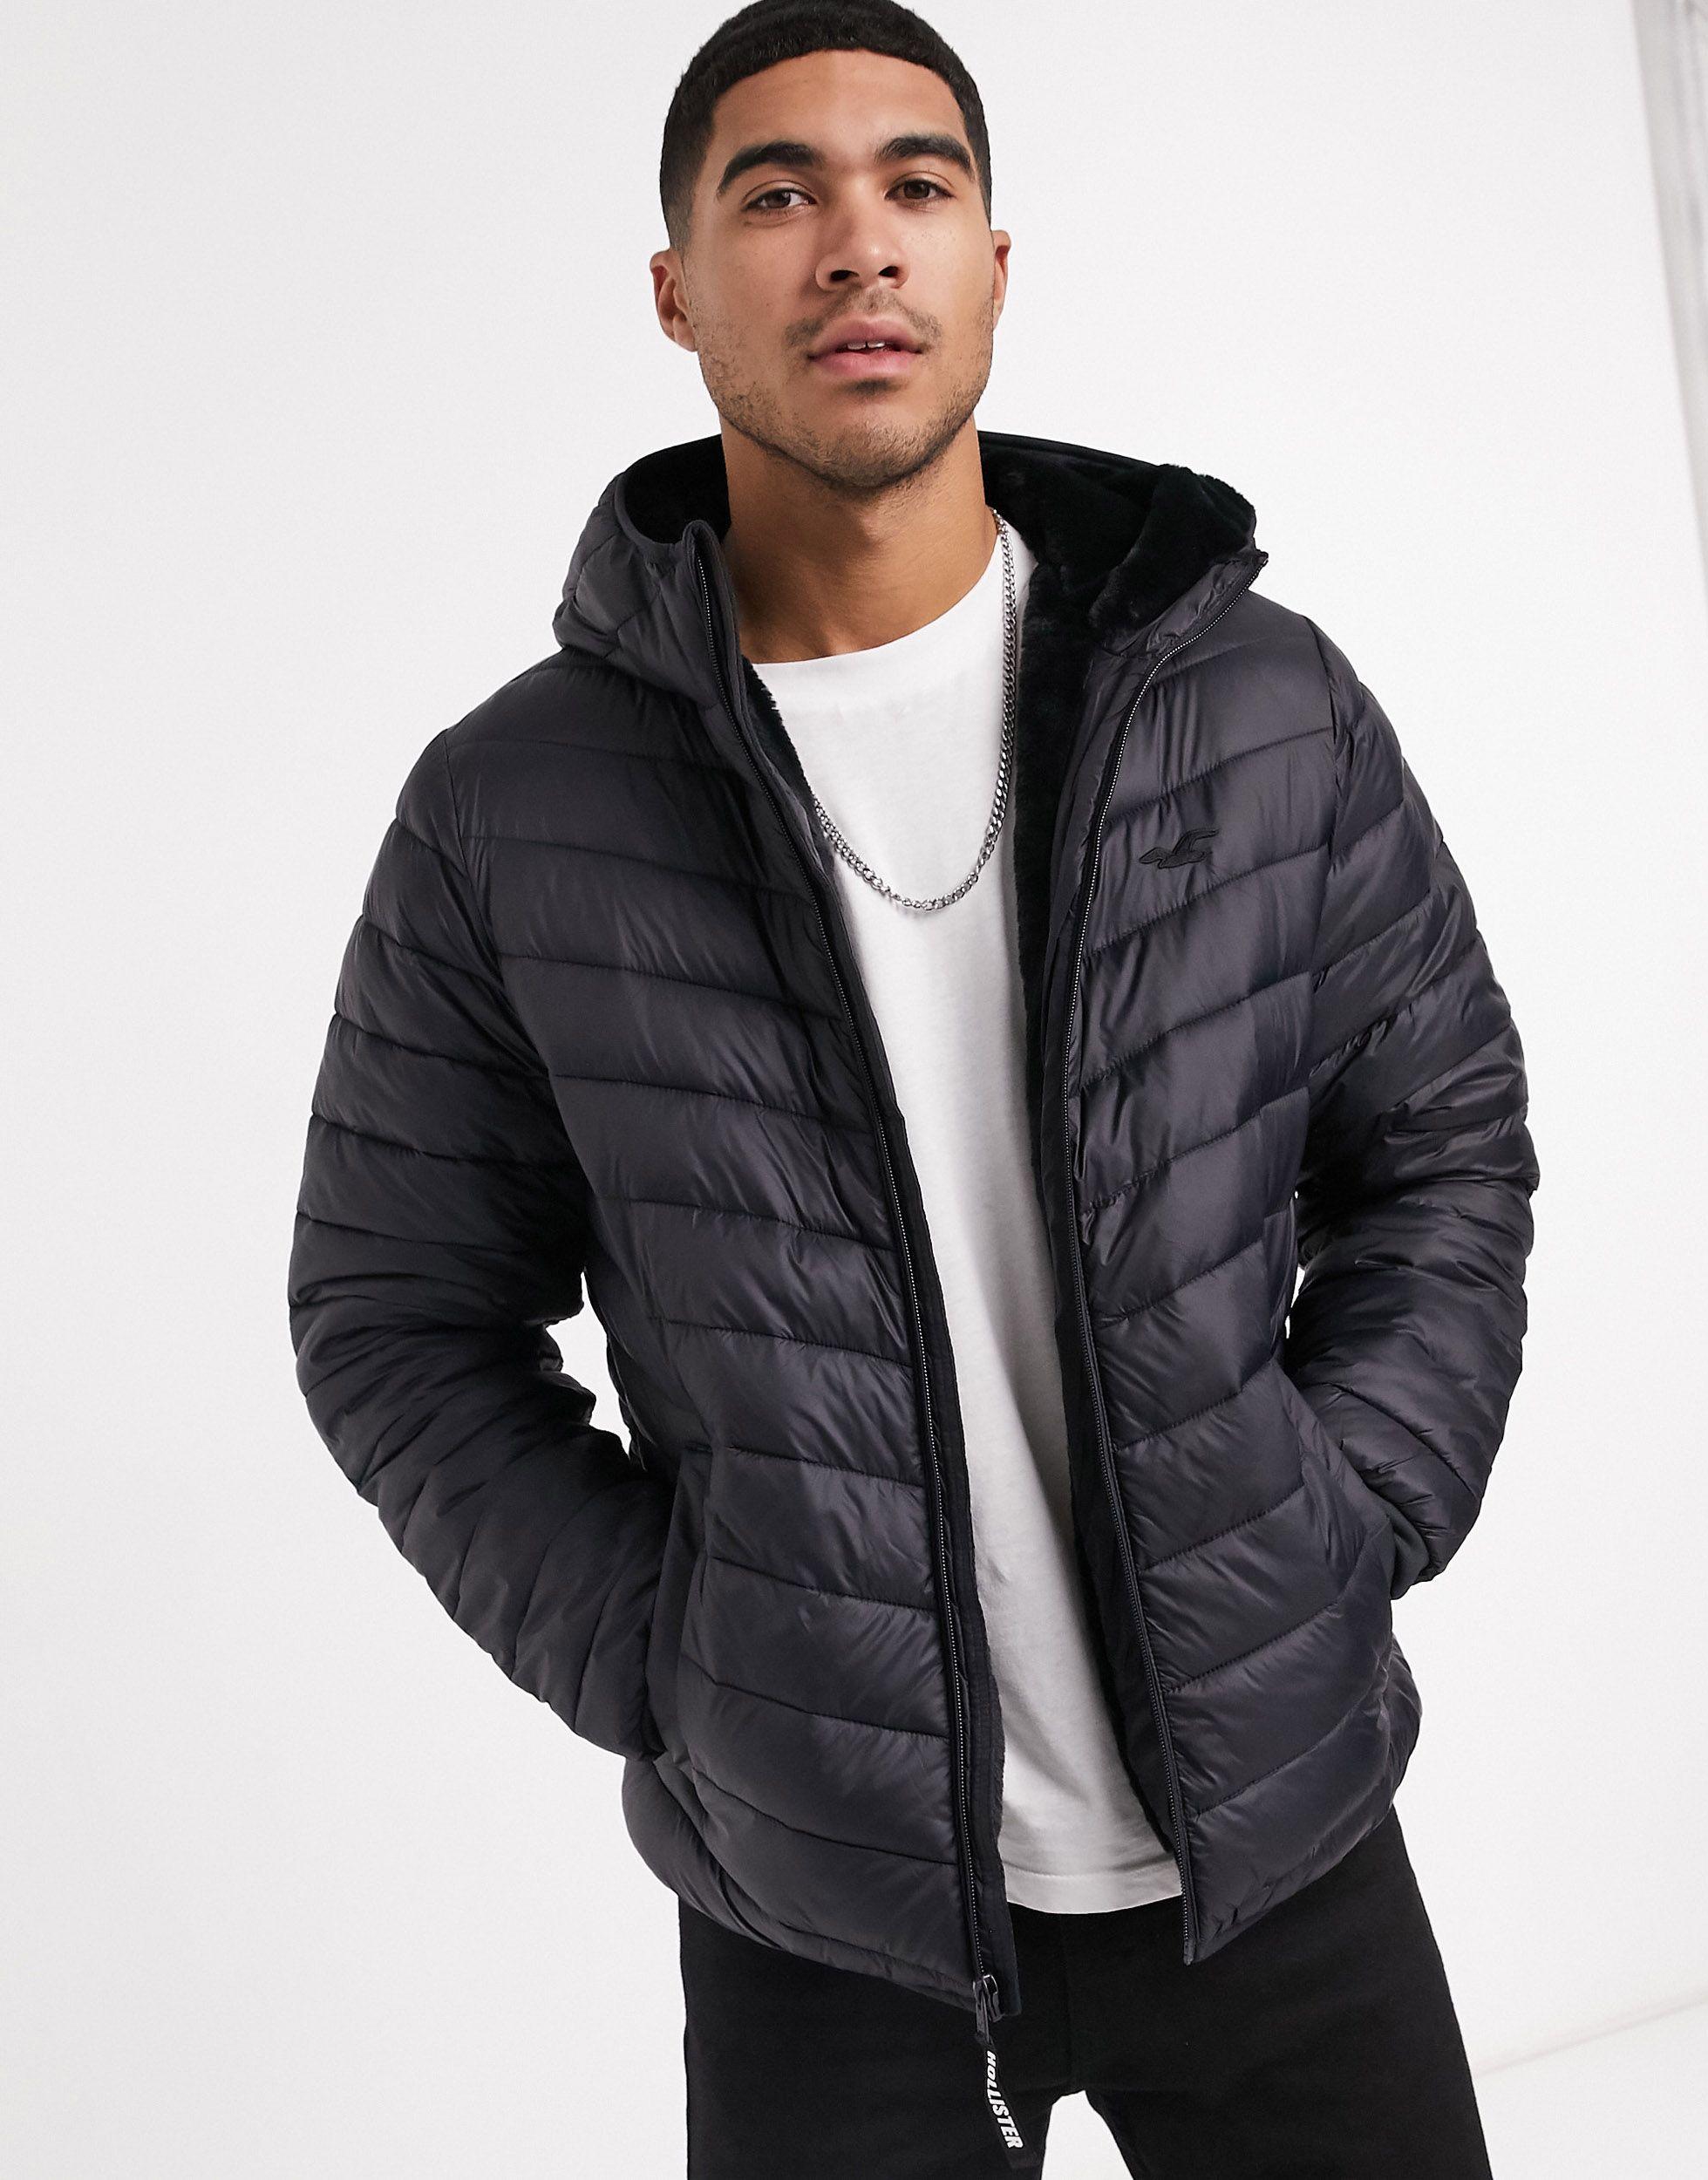 Hollister Synthetic Cozy Lined Hooded Puffer Jacket in Black for Men - Lyst